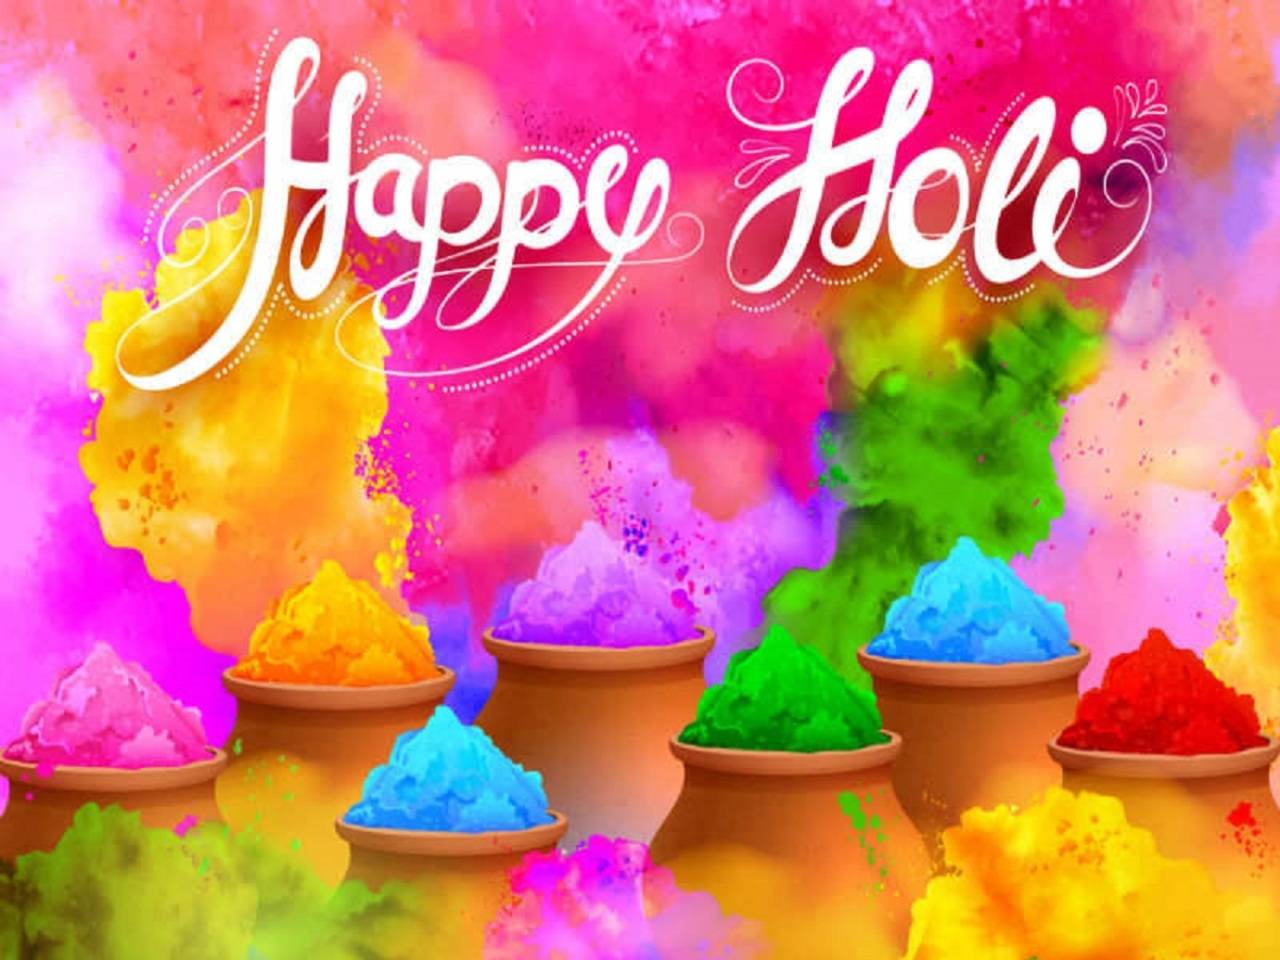 Ultimate Collection of Over 999 Happy Holi Images 2020 – Spectacular Full 4K Images